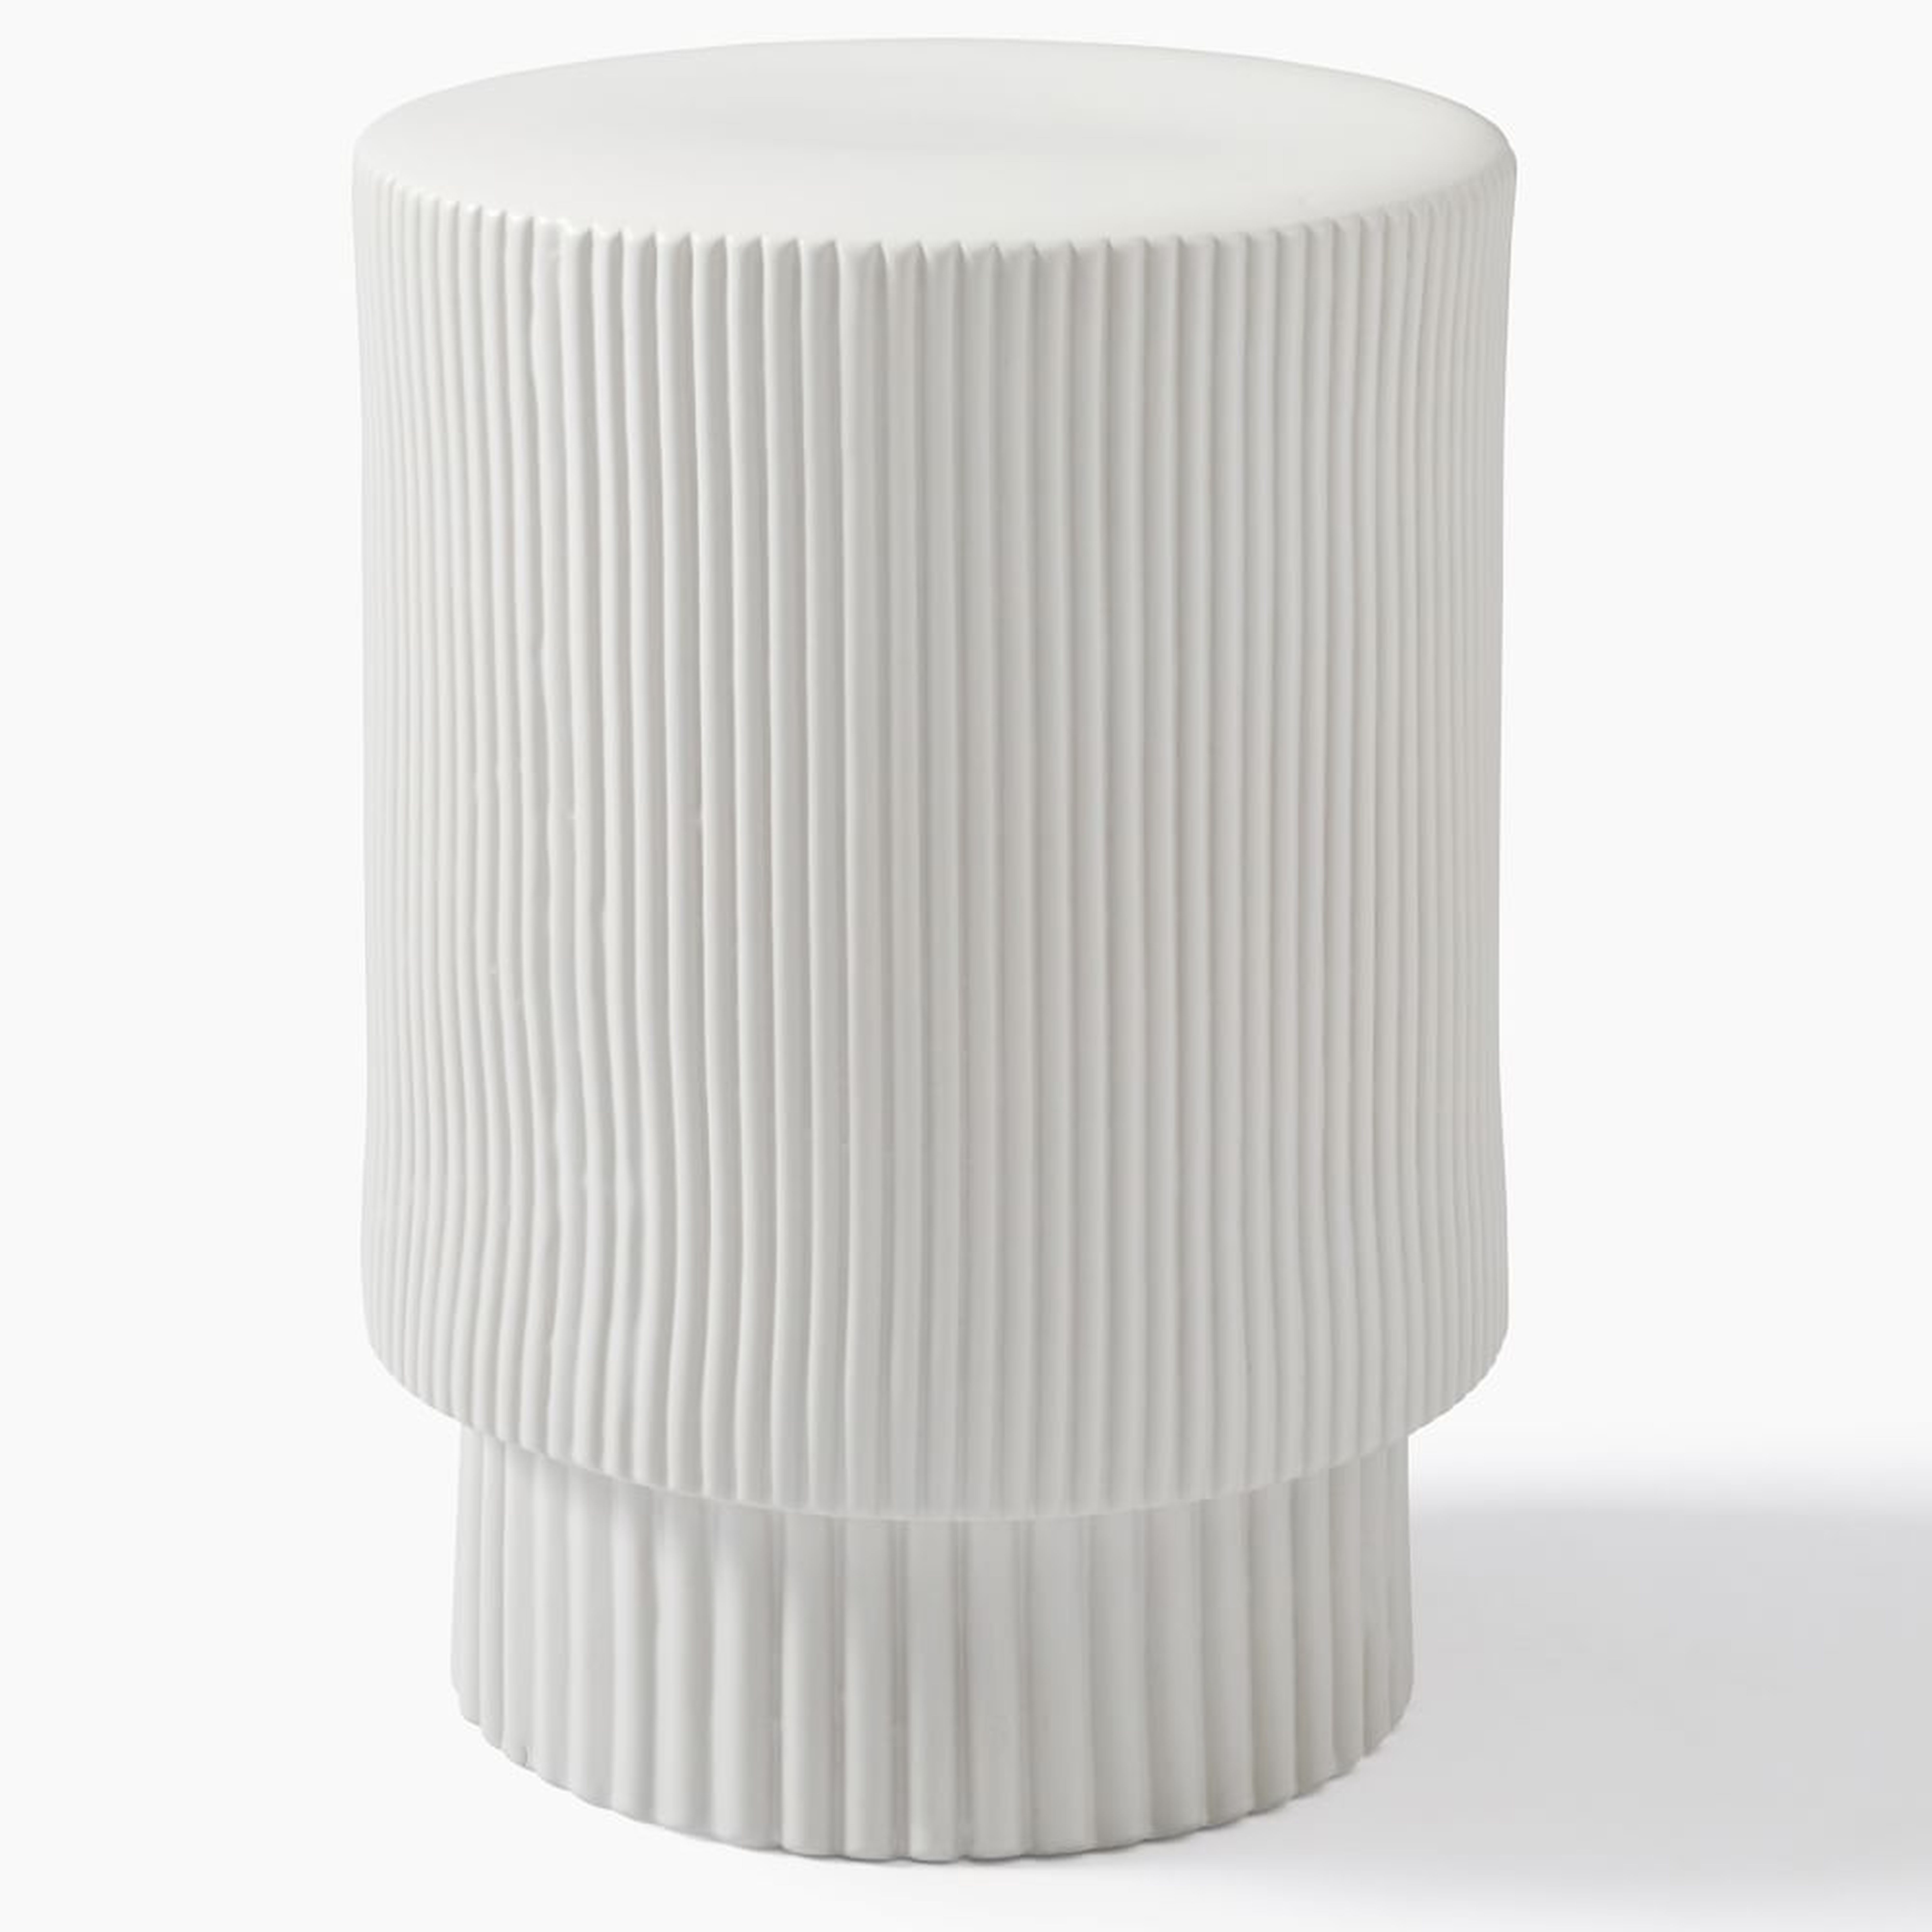 Textured (16") Collection Large 16 Inch Side Table, White - West Elm